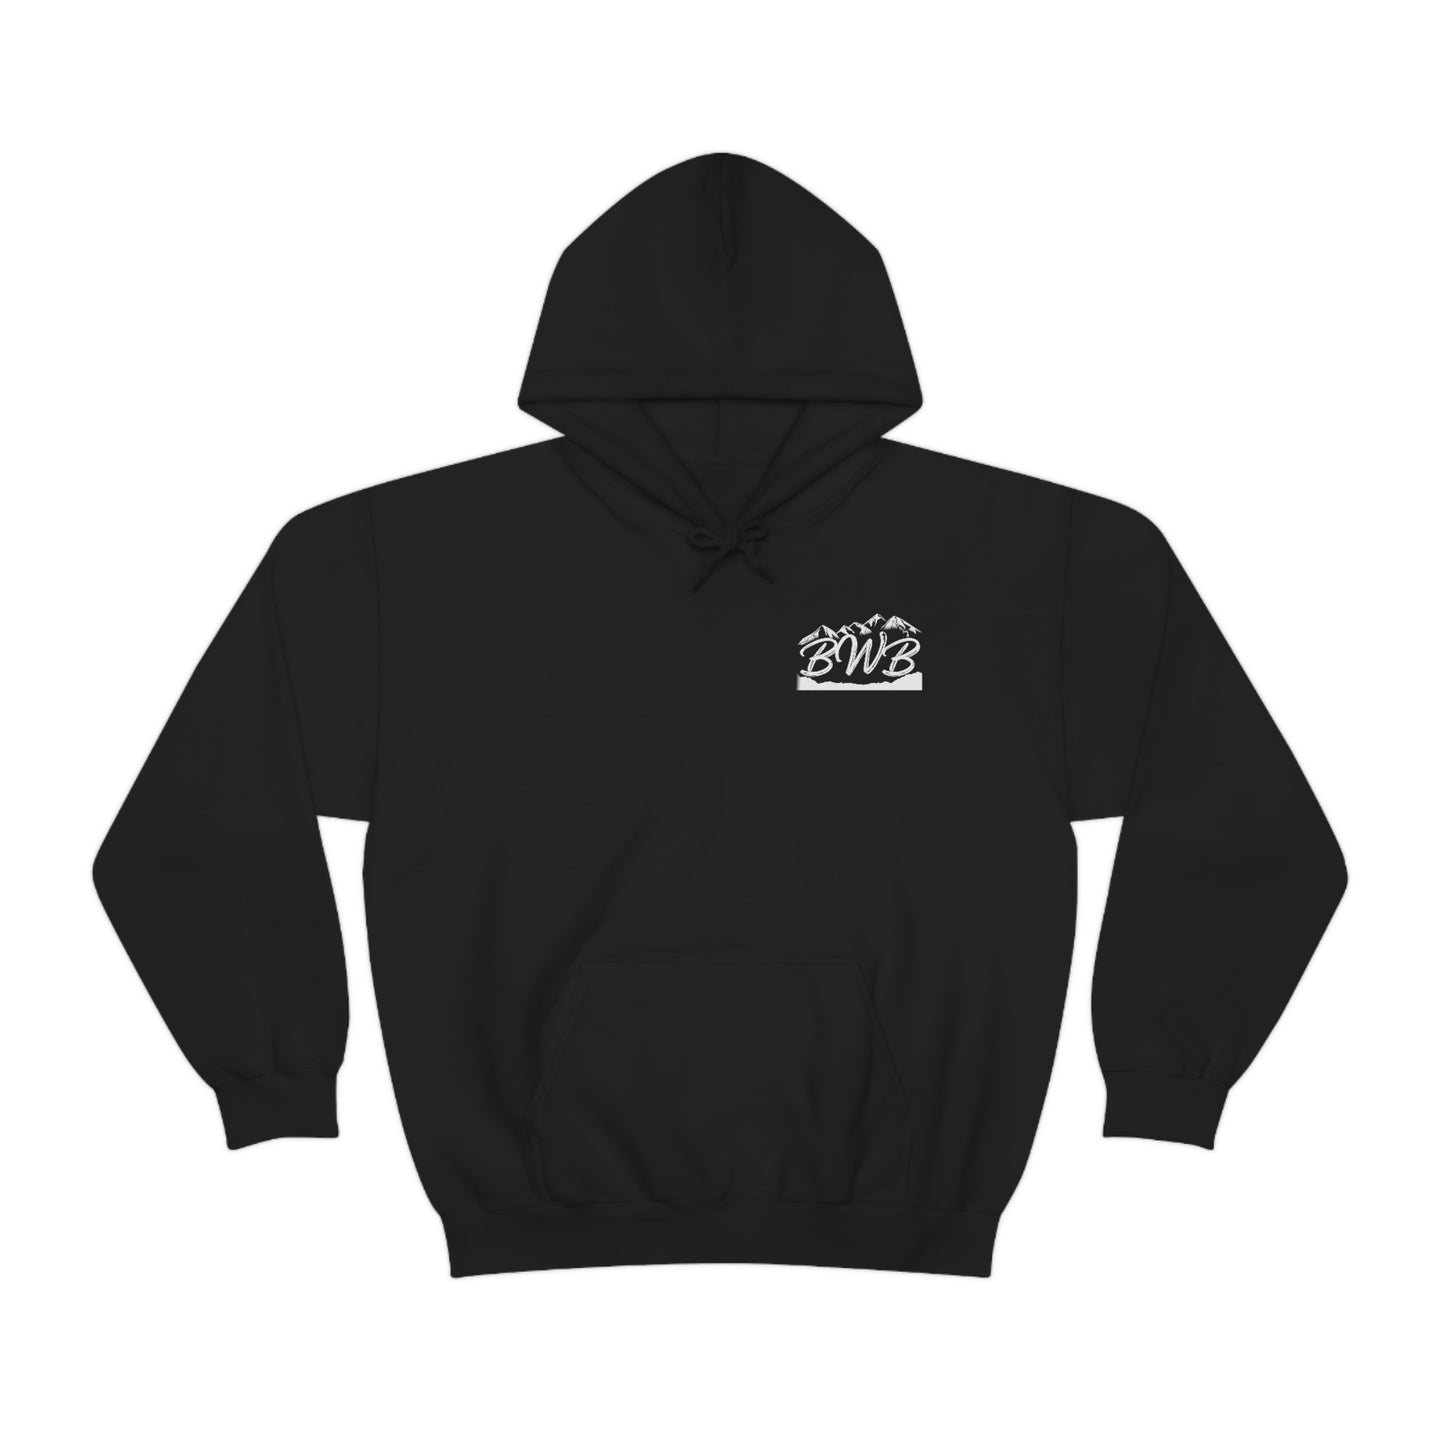 No One Will Be Taking My Guns Hoodie - Backwoods Branding Co.